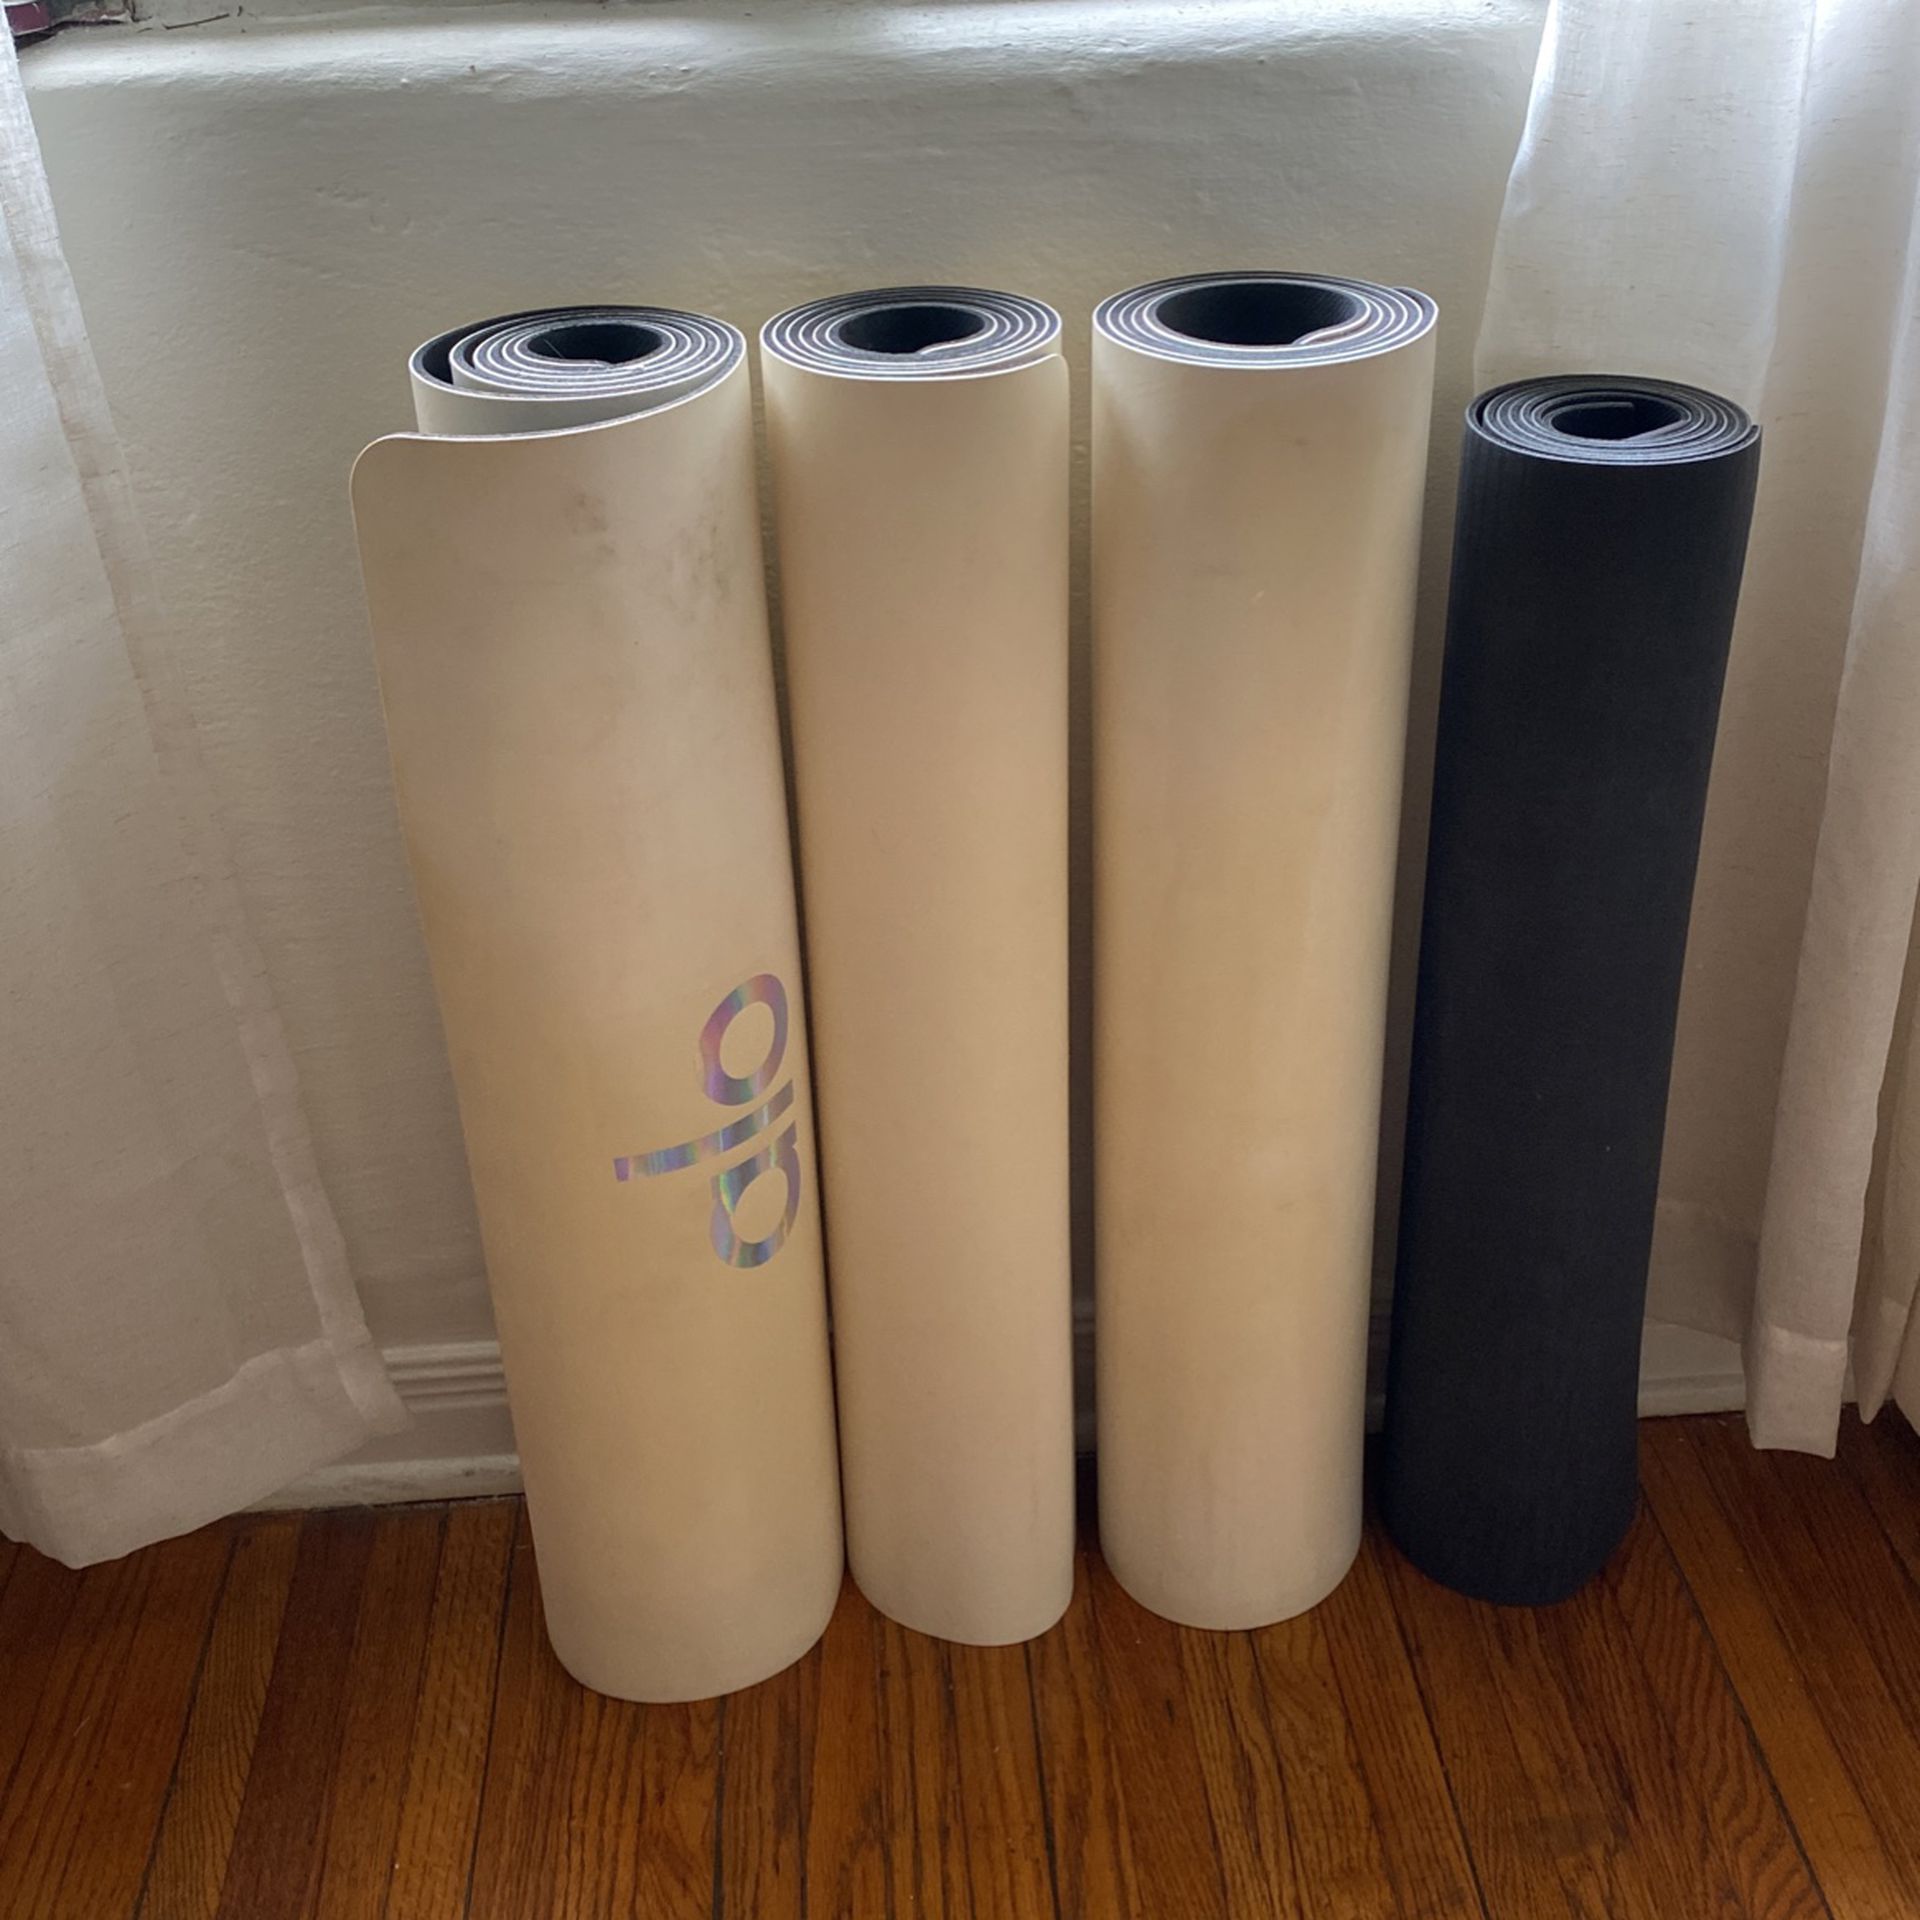 Gorilla LARGE Yoga Mat $100 for Sale in Los Angeles, CA - OfferUp